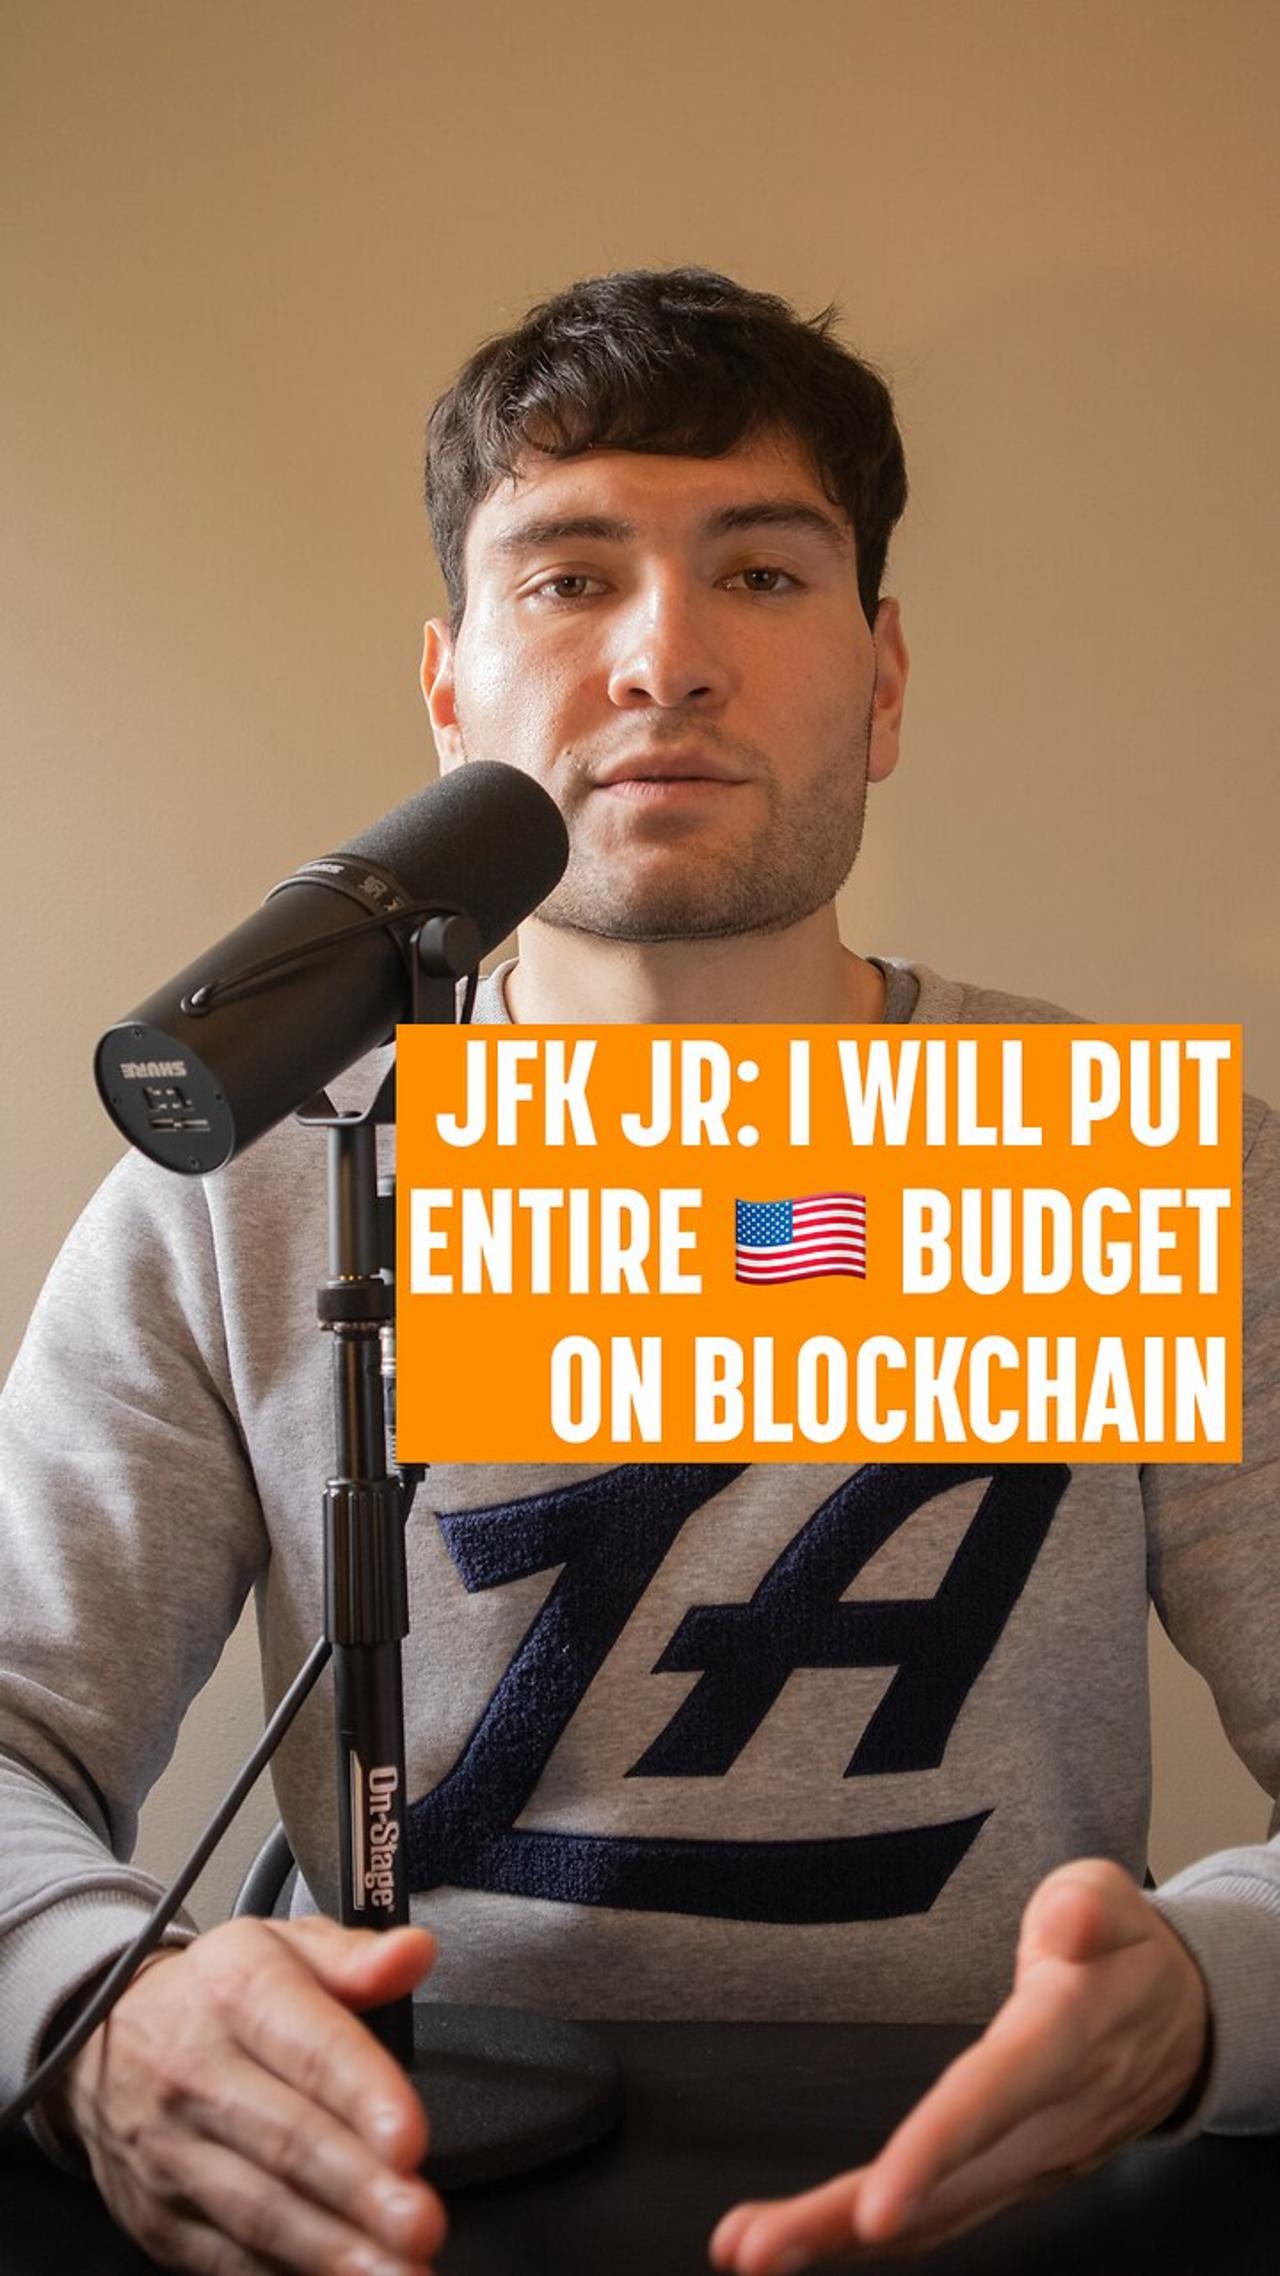 John F. Kennedy Jr. promises to put "entire US budget" on blockchain, if elected.